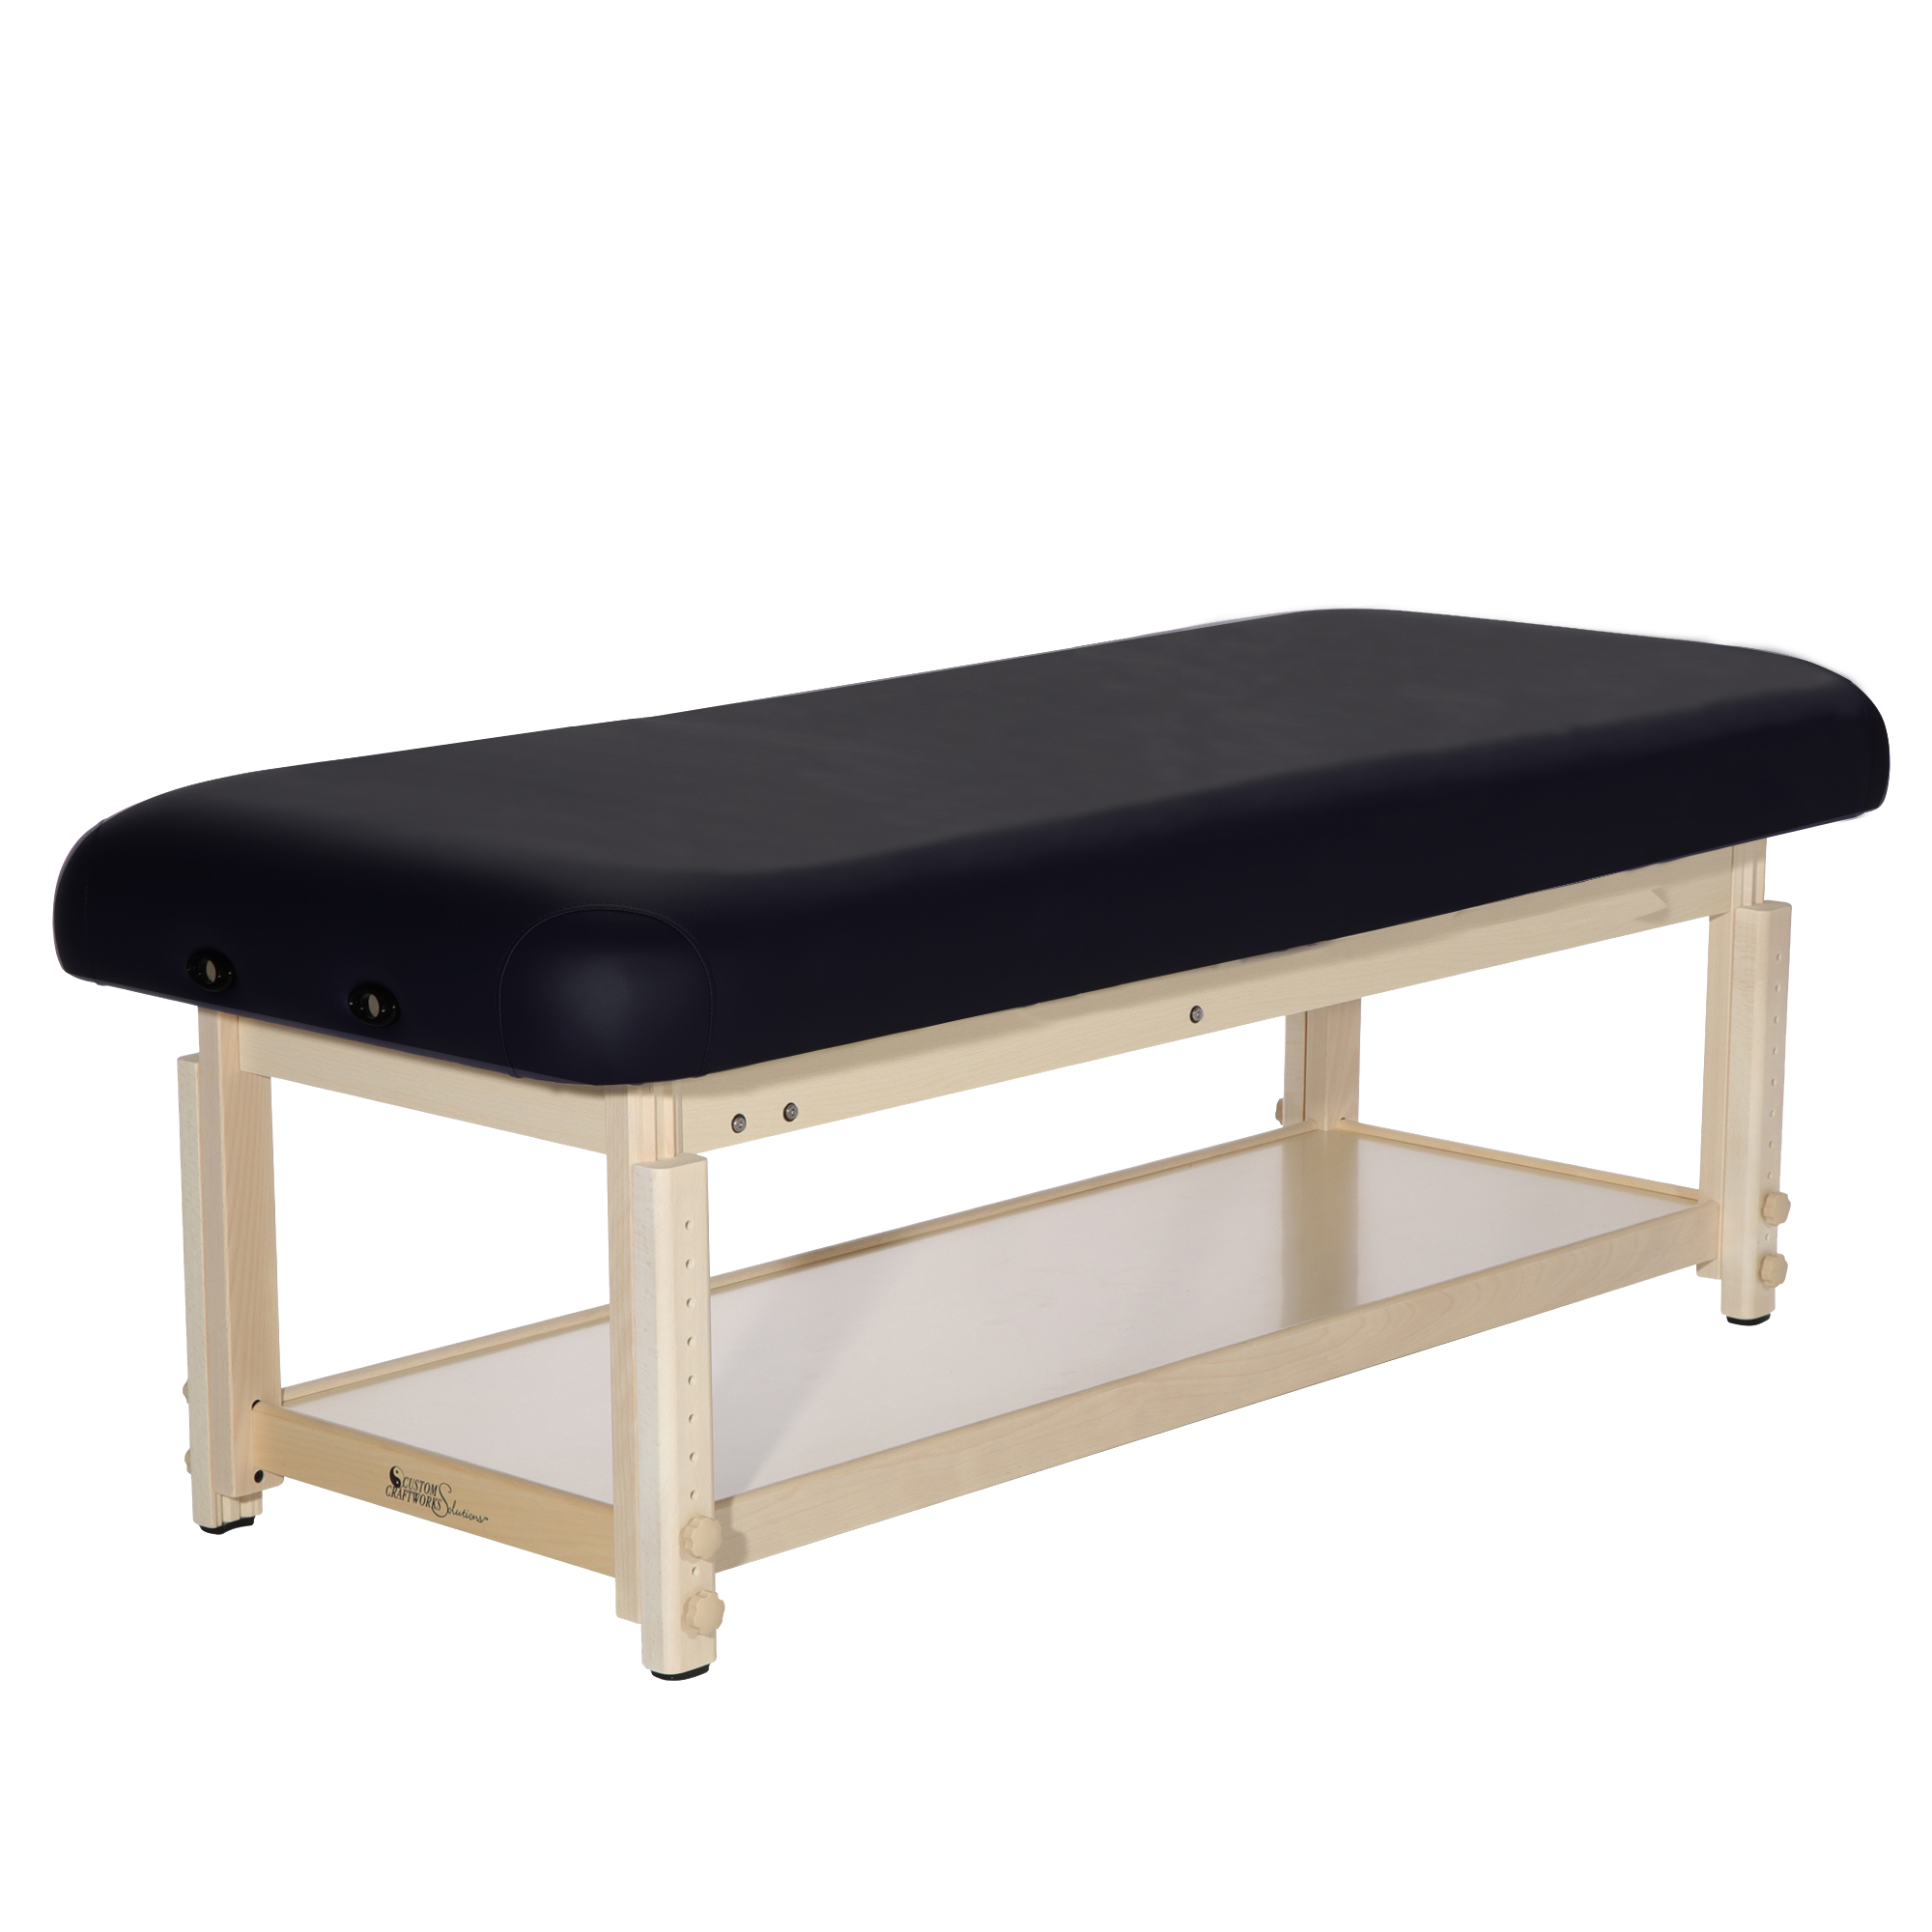 Is a Stationary Massage Table Right for You?